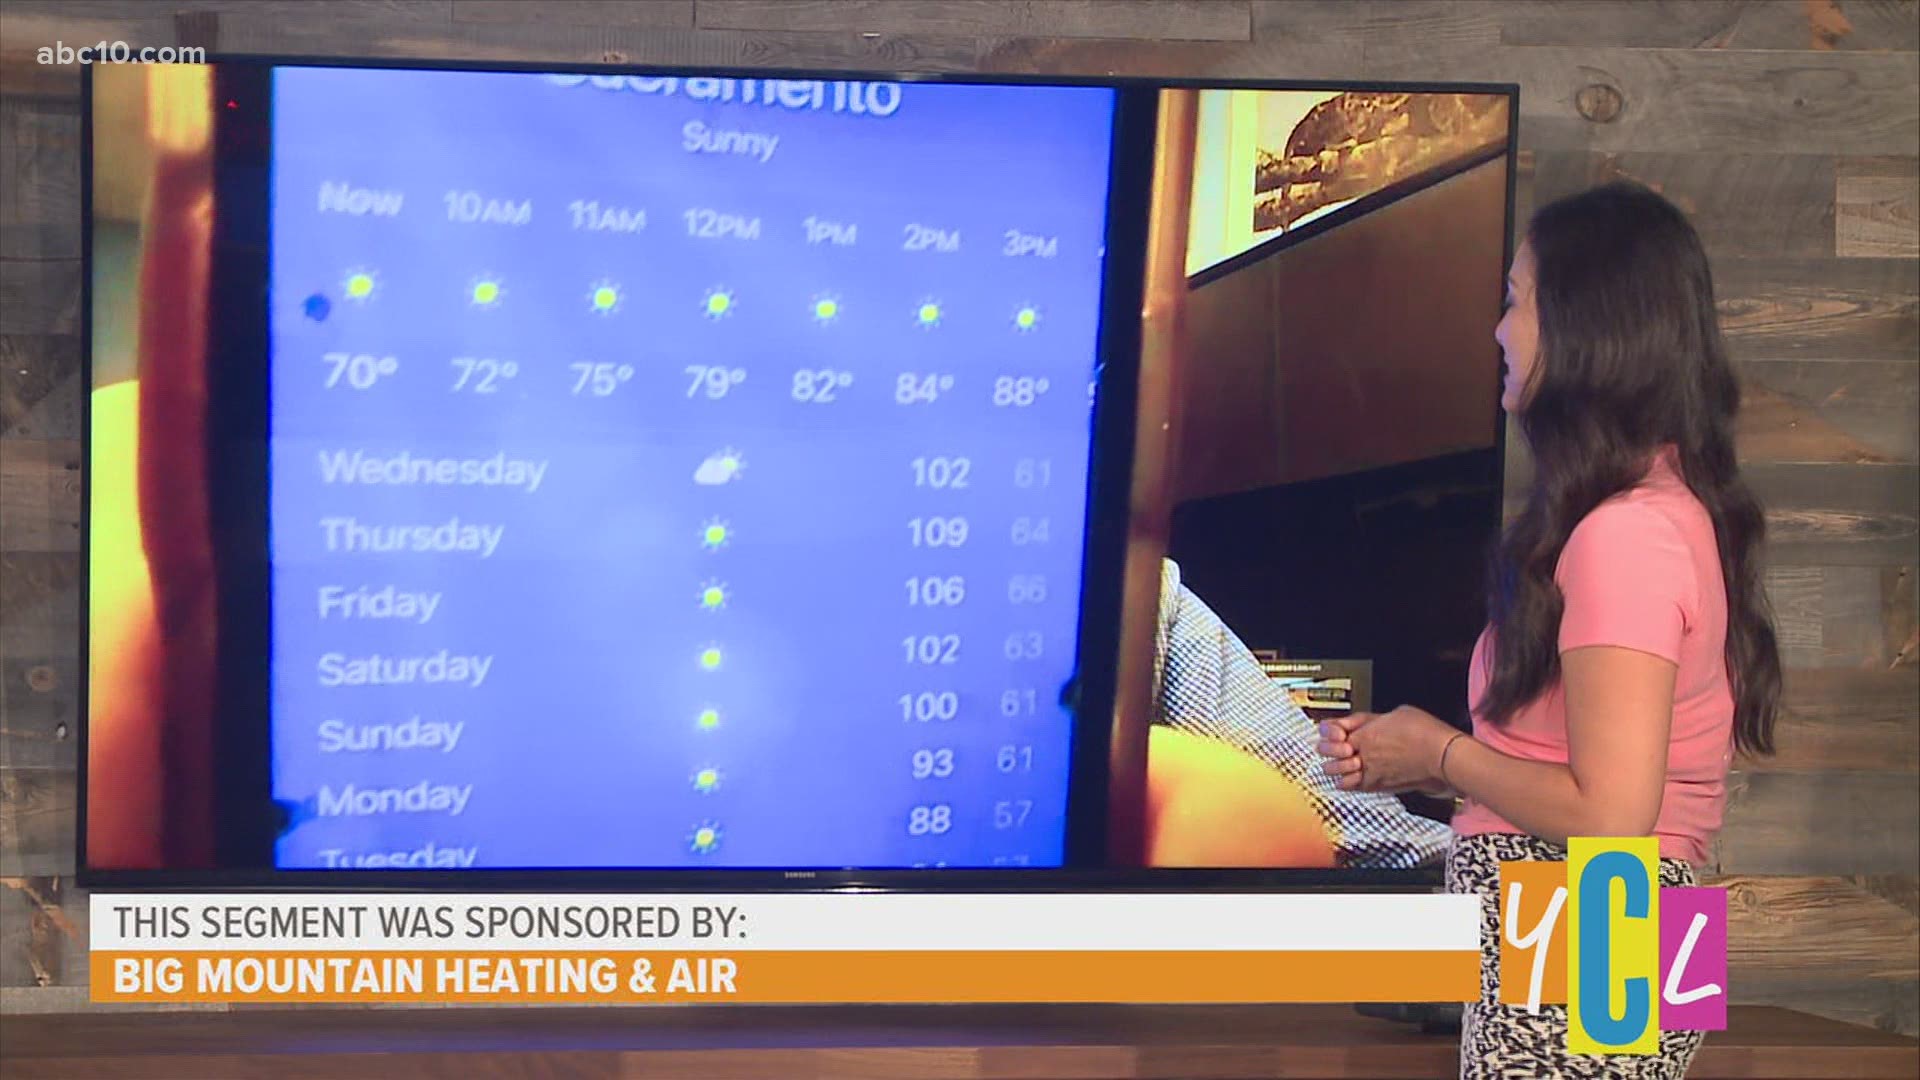 Quick, quality air conditioning solutions to help homeowners beat the heat while staying at home.
This segment was paid for by Big Mountain Heating & Air.